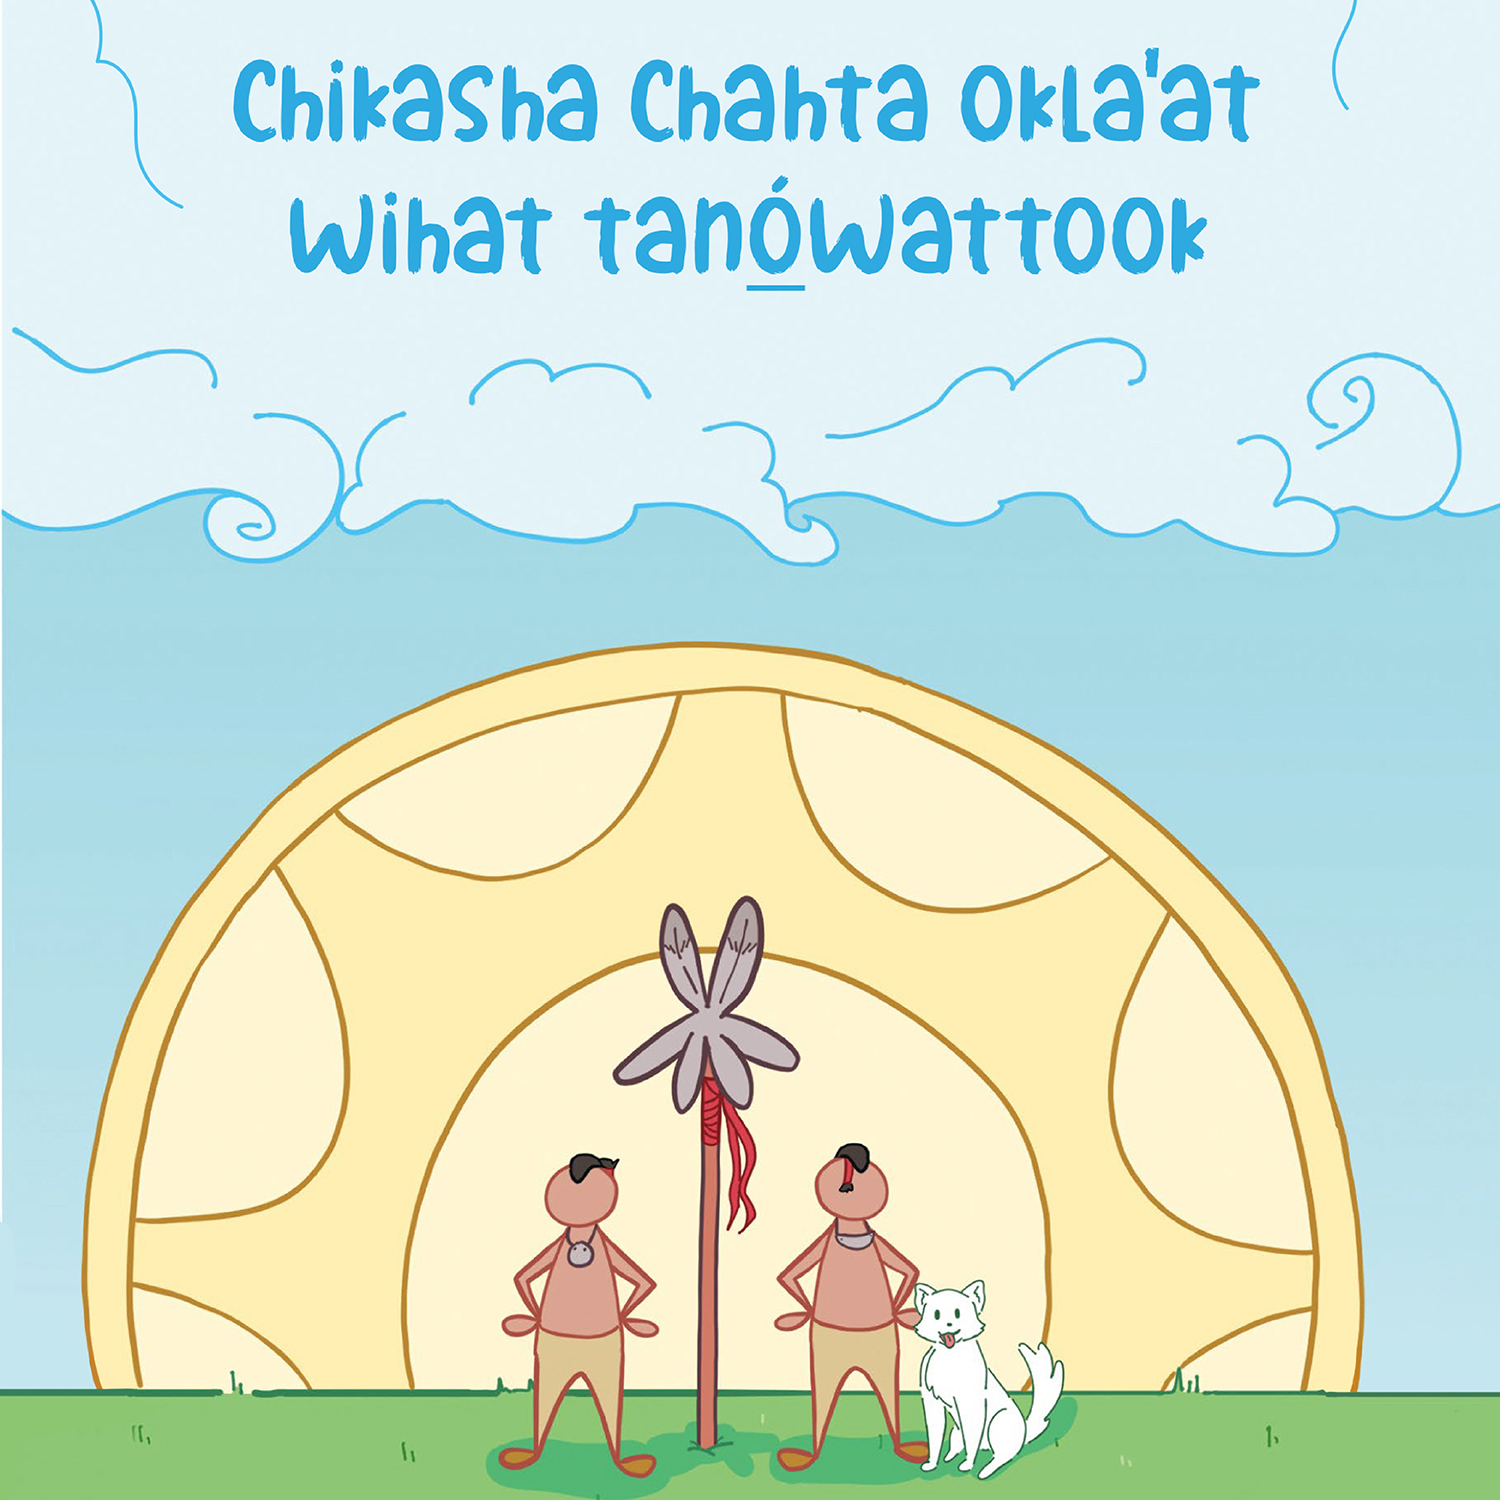 Chikasha Chahta' oklaat wihat tanó̲wattook (The Migration Story of the Chickasaw and Choctaw People) <br> PREORDER (available Oct. 5th)